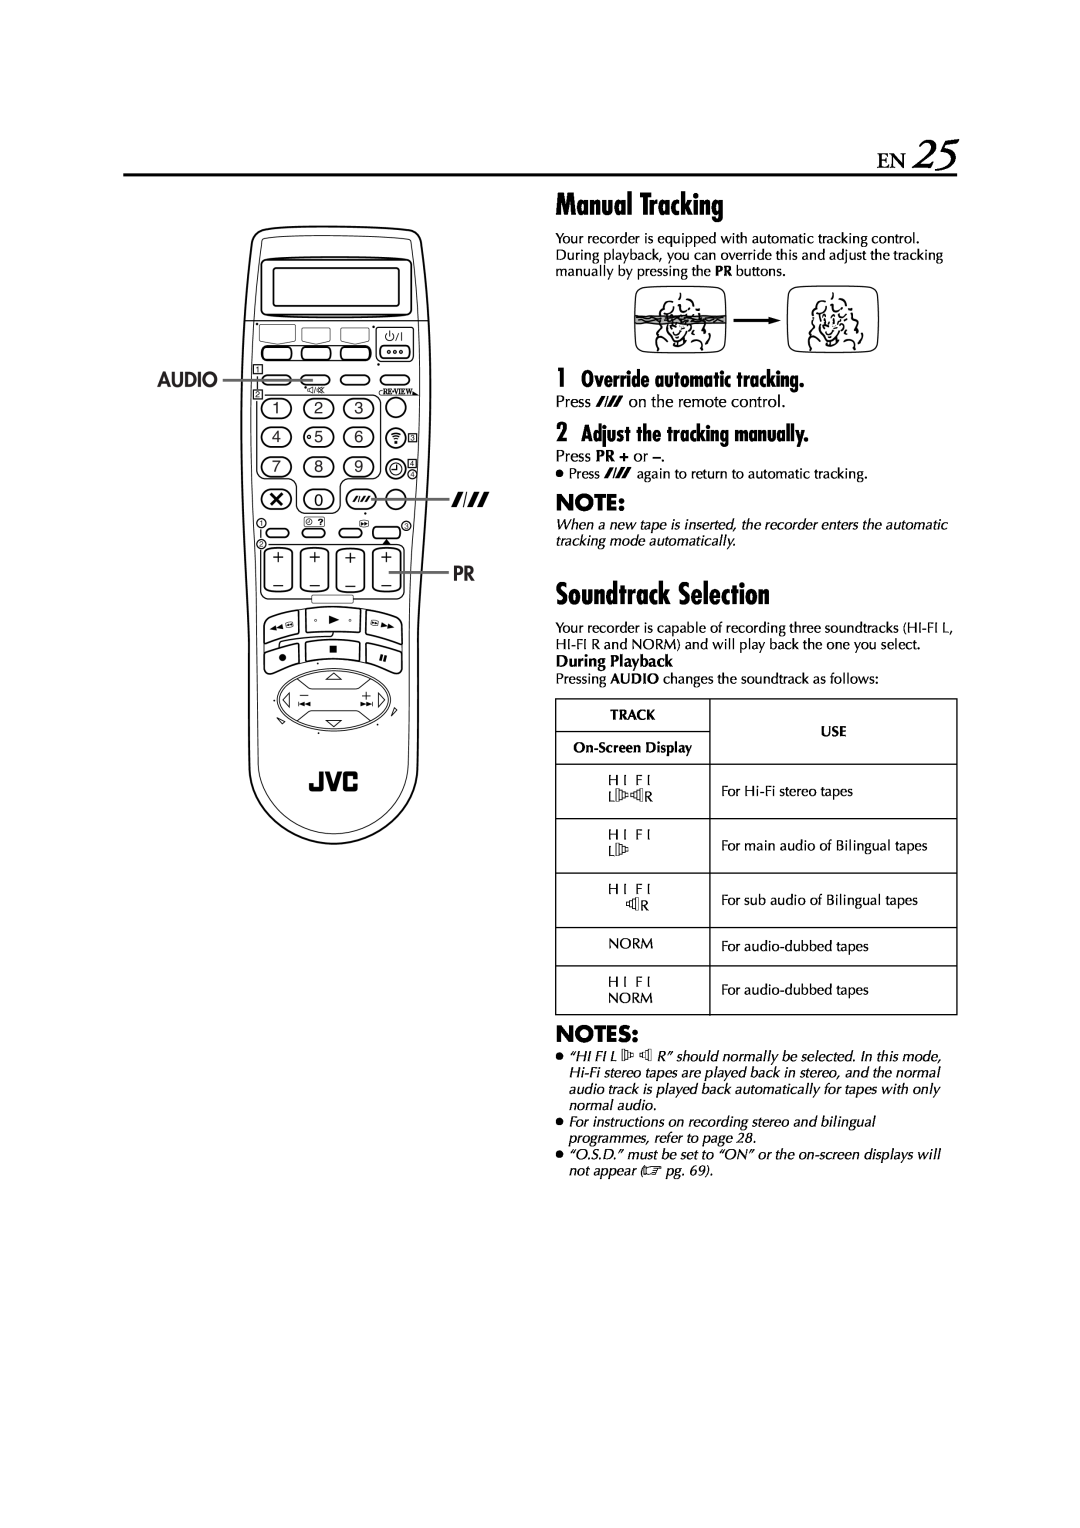 JVC LPT0616-001A Manual Tracking, Soundtrack Selection, Override automatic tracking, Adjust the tracking manually 